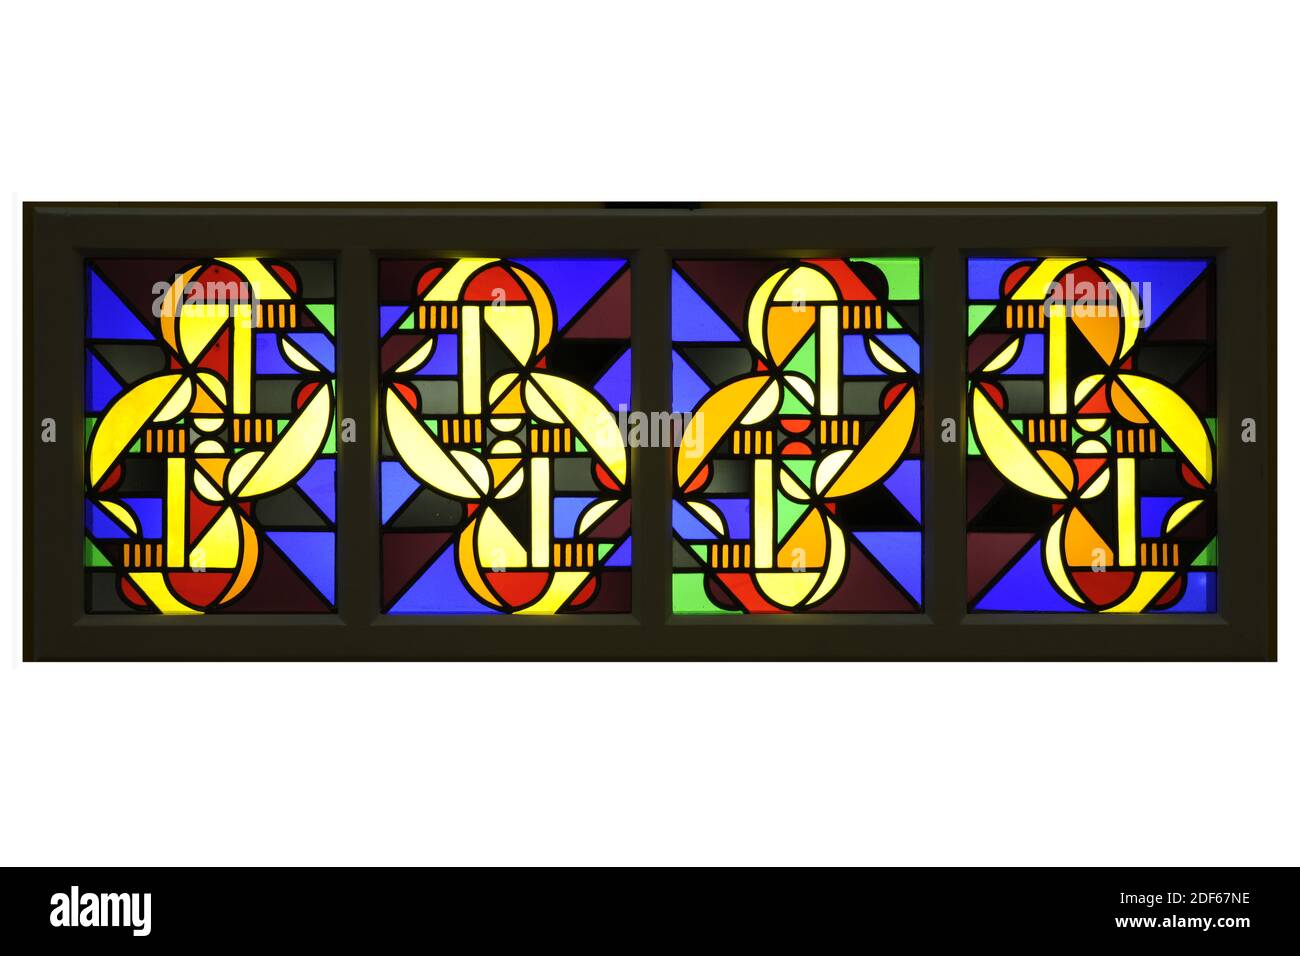 https://c8.alamy.com/comp/2DF67NE/stained-glass-window-theo-van-doesburg-1917-glass-wood-lead-paint-stained-glass-general-312-x-225cm-312-x-225mm-each-four-rectangular-glass-stained-glass-windows-with-the-same-abstract-composition-summarized-in-a-wooden-gray-painted-frame-the-inner-shape-with-round-shapes-consists-of-yellow-orange-and-red-glass-surfaces-the-outer-shape-with-triangular-shapes-consists-of-purple-blue-gray-and-green-areas-the-two-left-windows-are-mirrored-in-shape-with-the-color-areas-in-the-inner-shape-being-the-same-and-the-outer-shapes-differing-in-the-right-two-mirrored-windows-2DF67NE.jpg